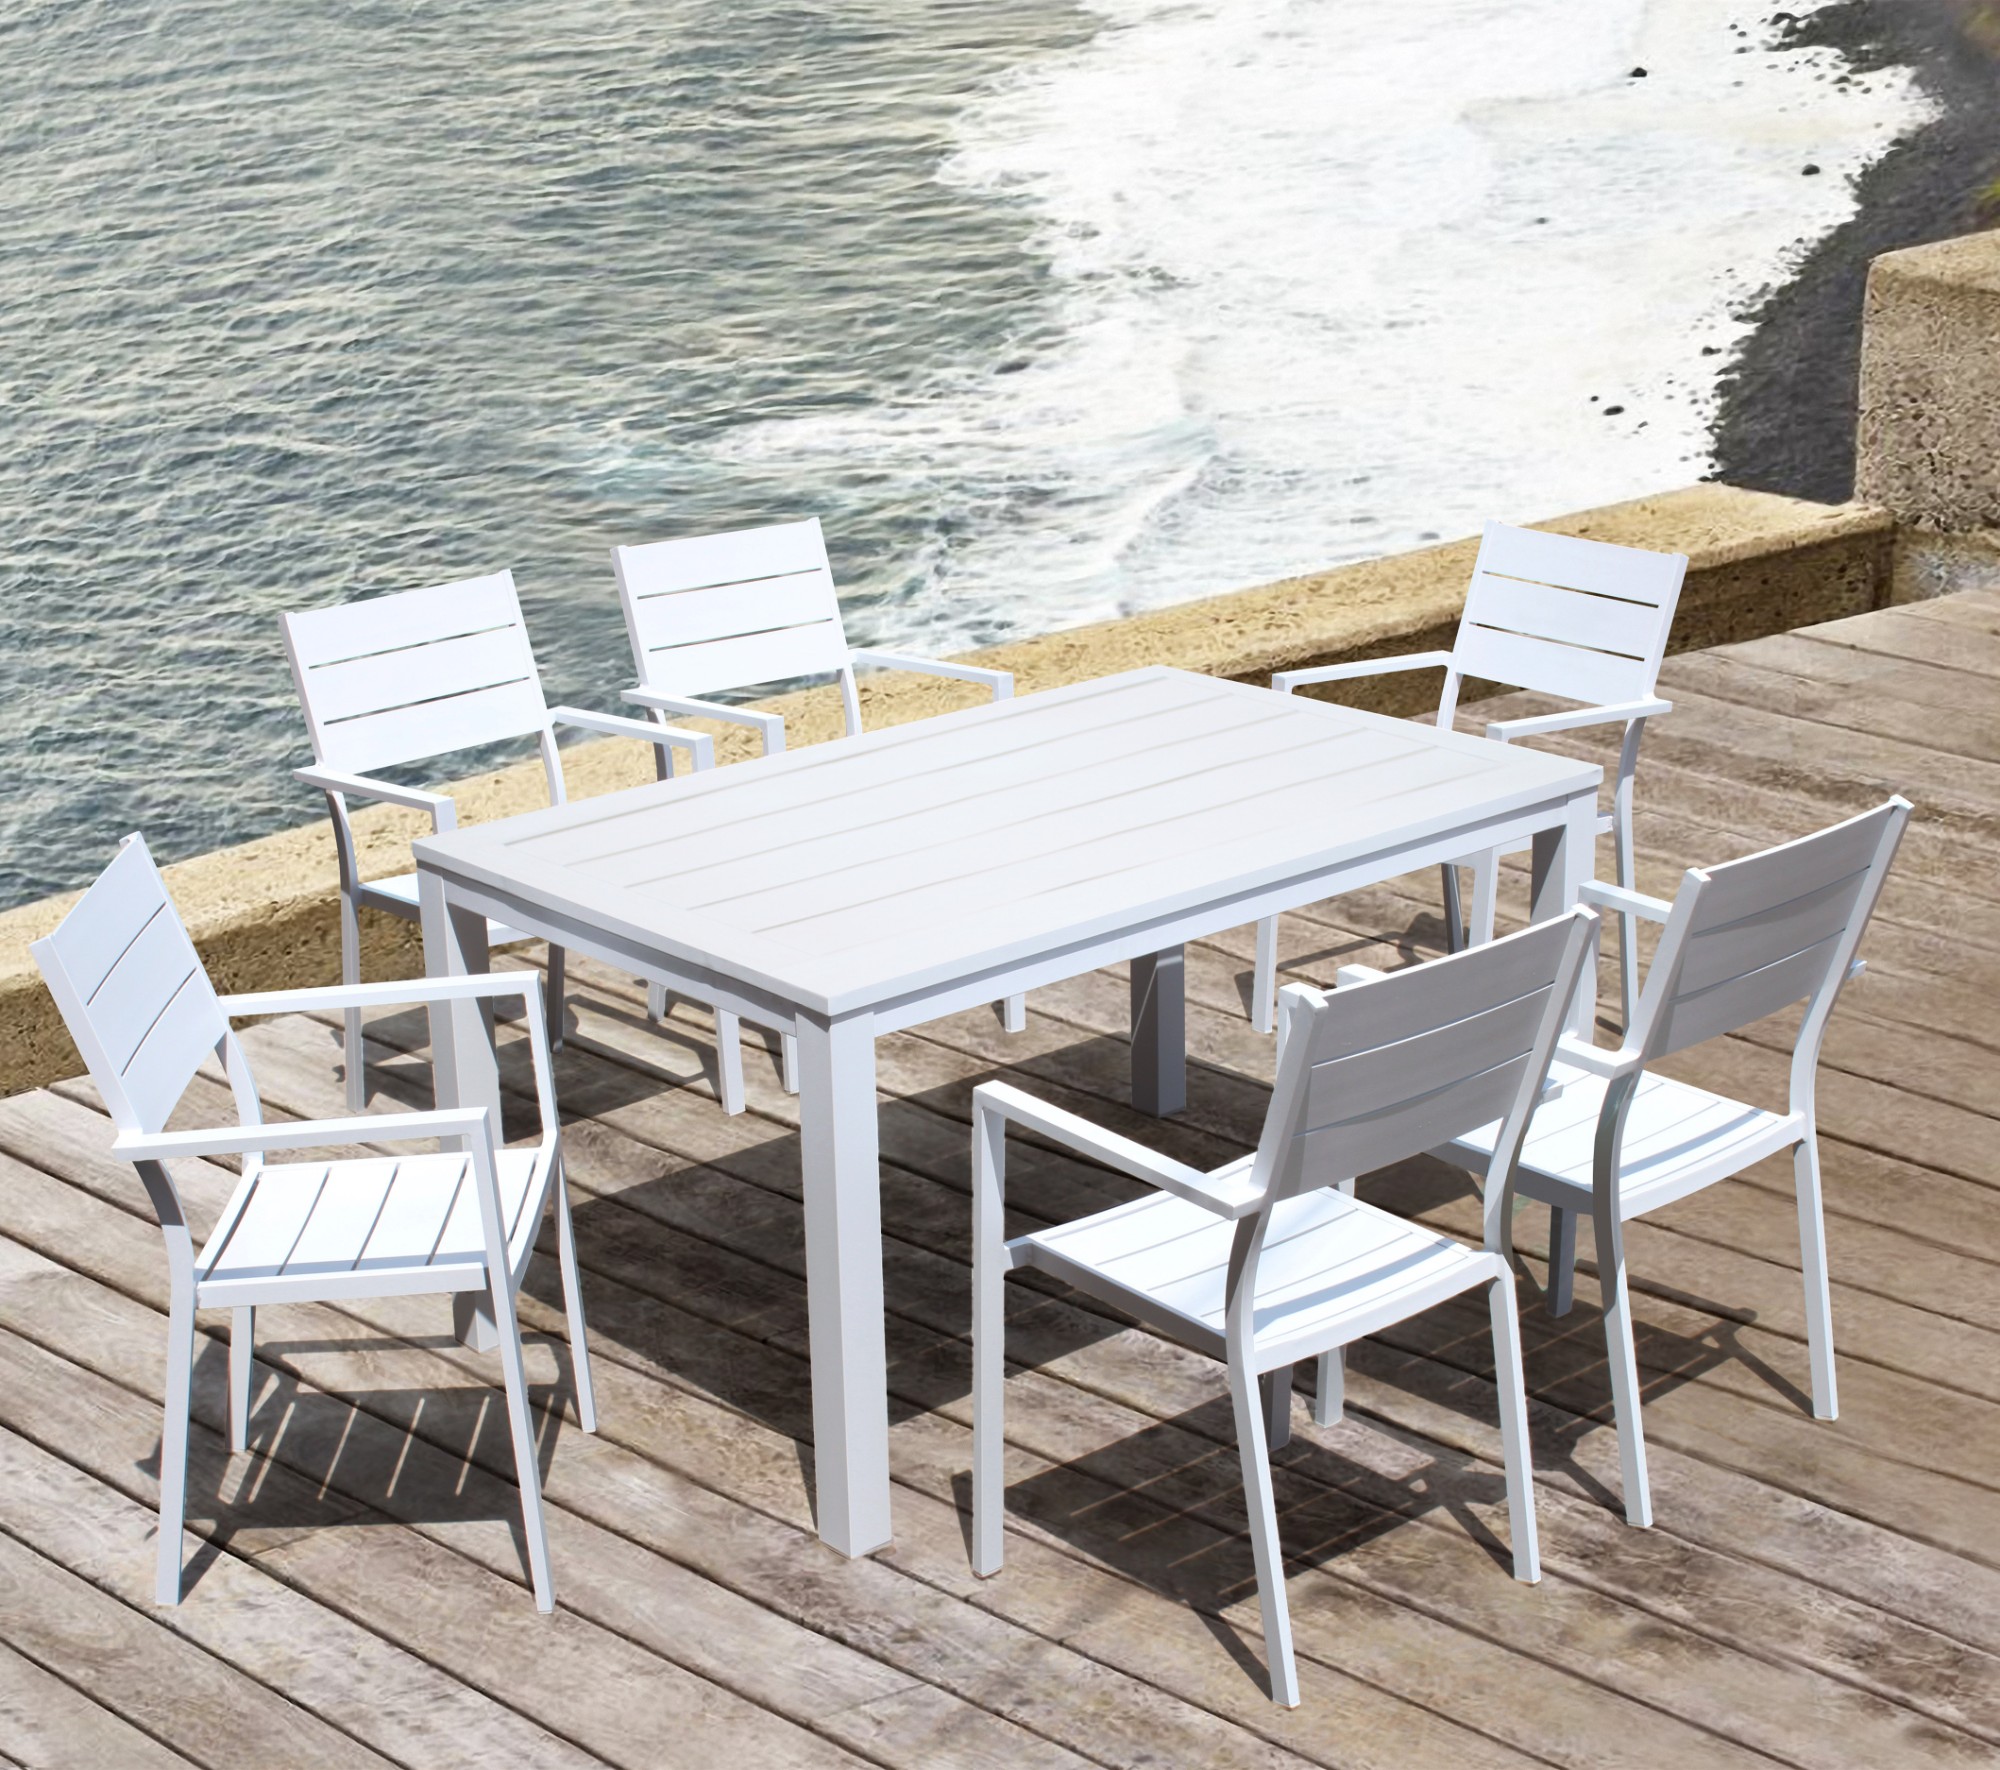 Outdoor Dining Tables And Chairs Patio Furniture